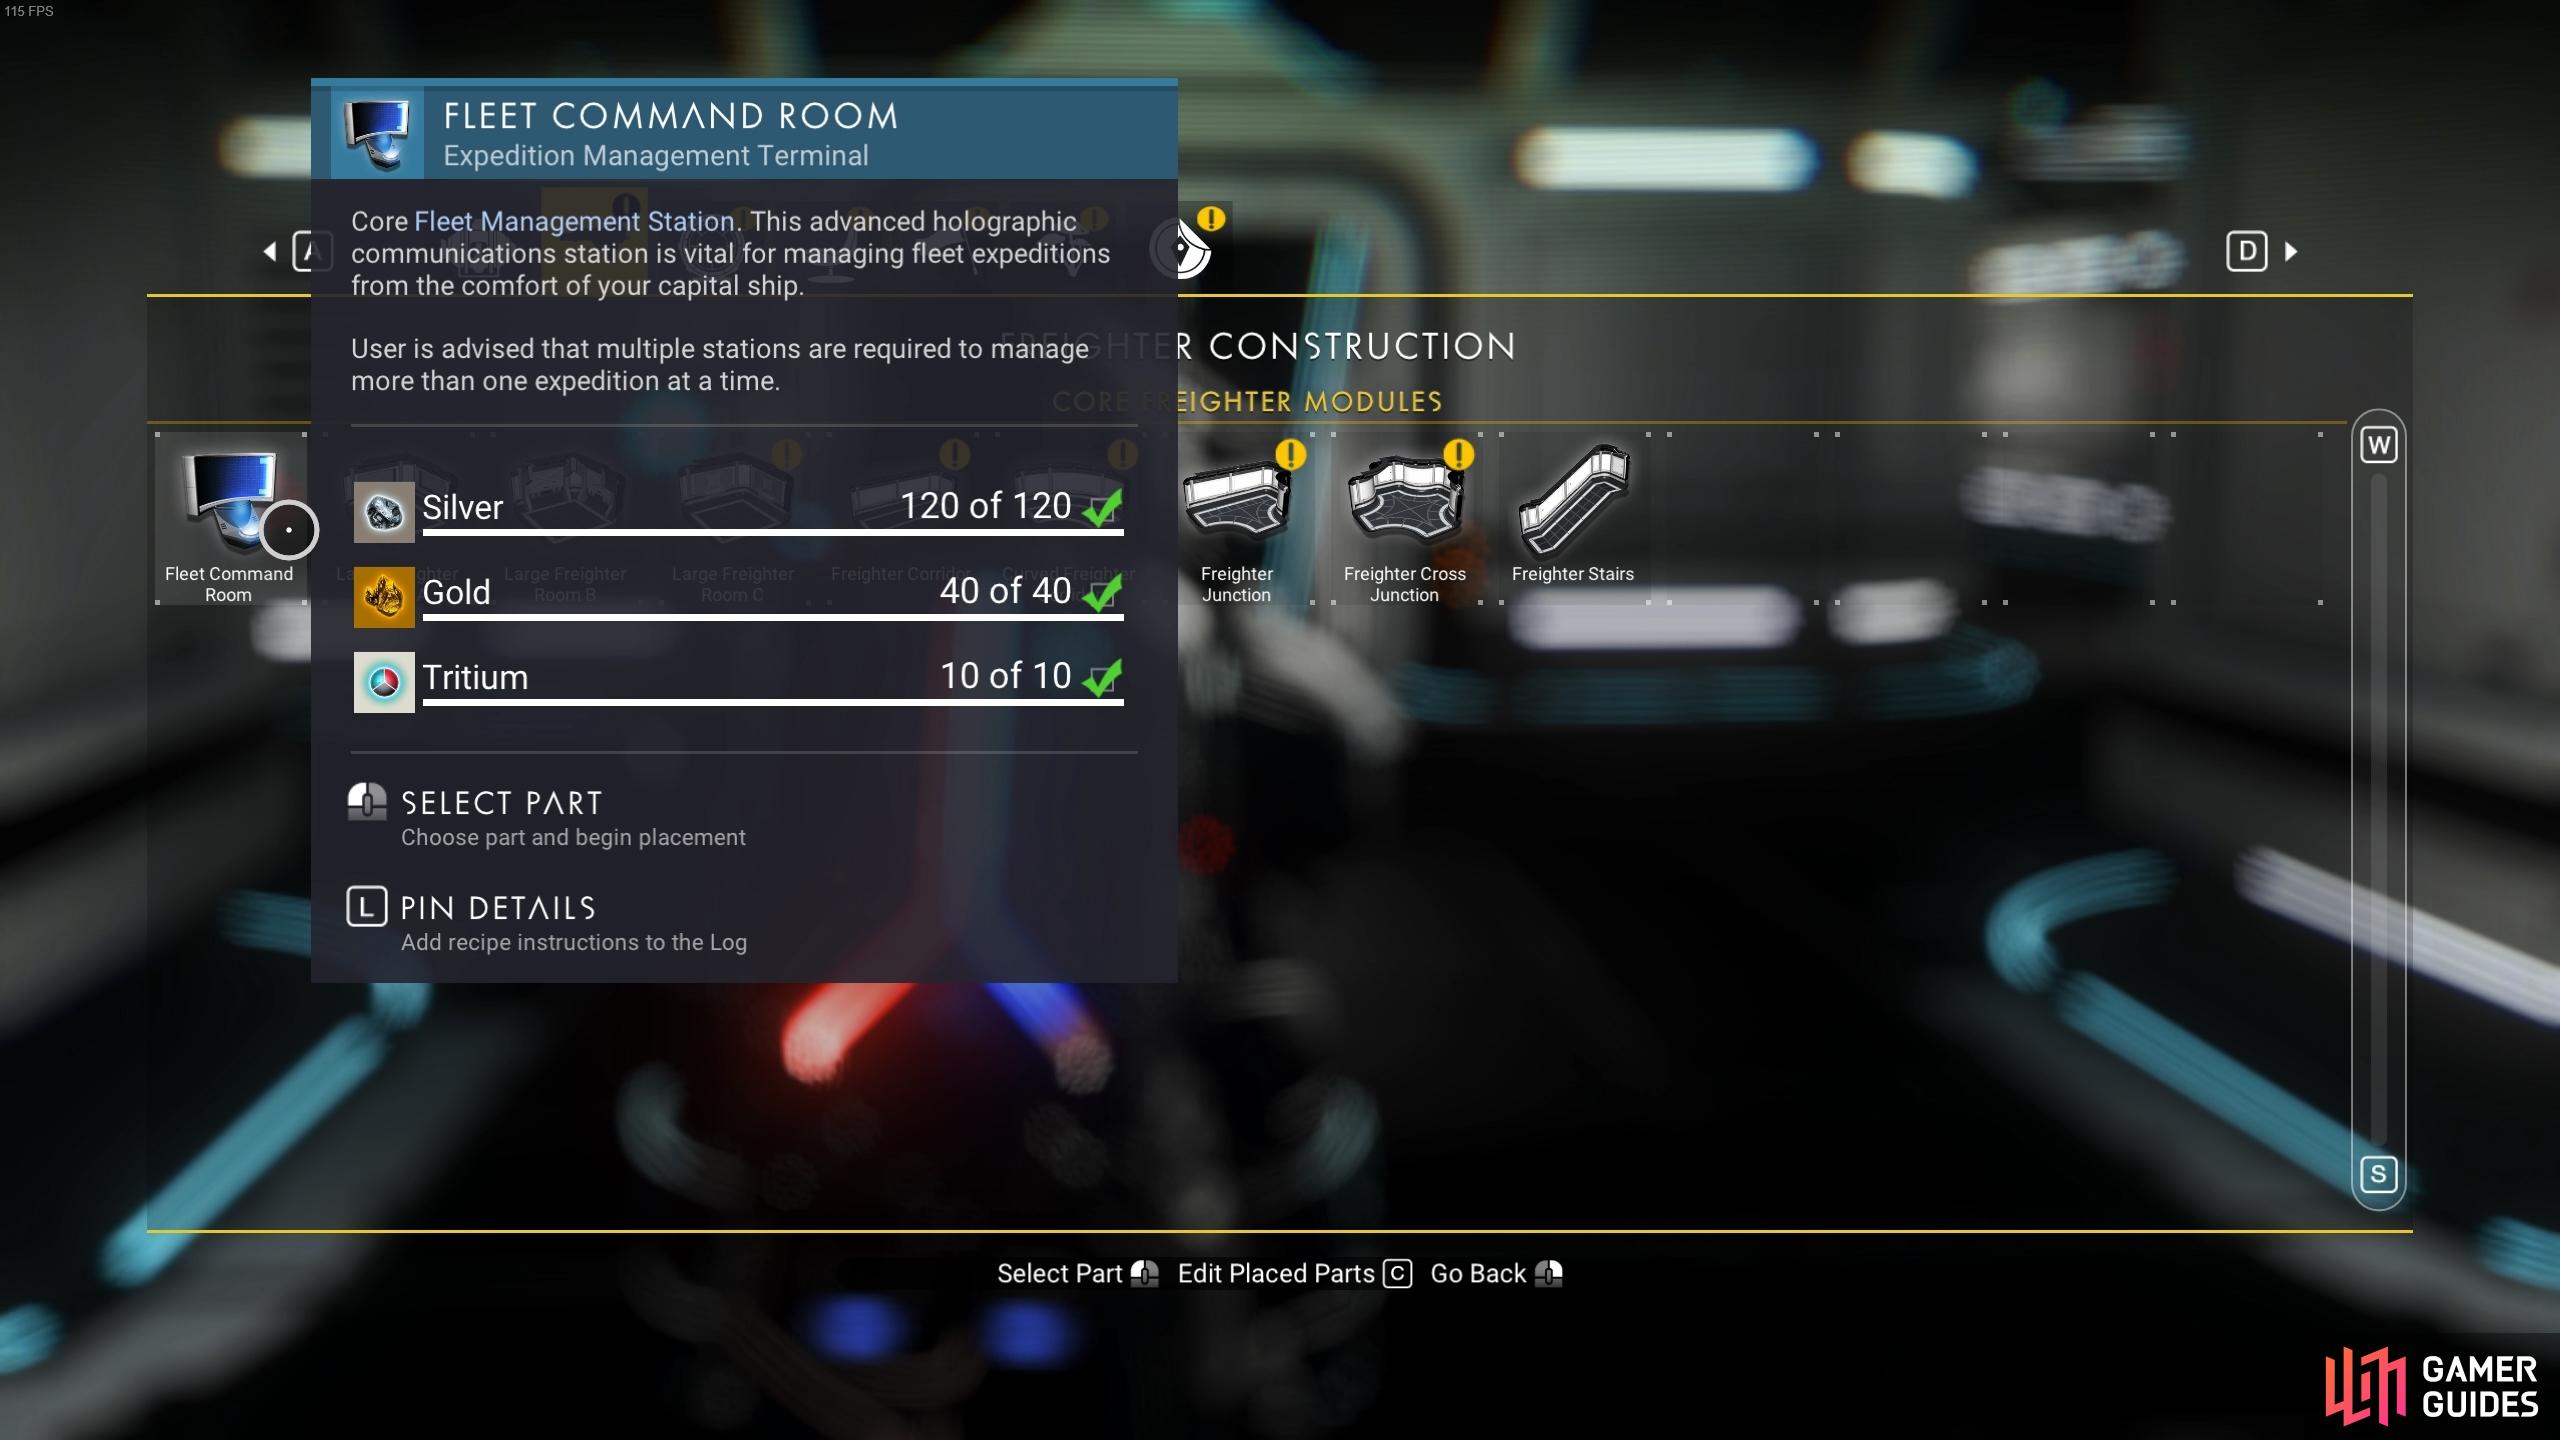 You'll find the blueprint for the Fleet Command Room in the constructions menu.